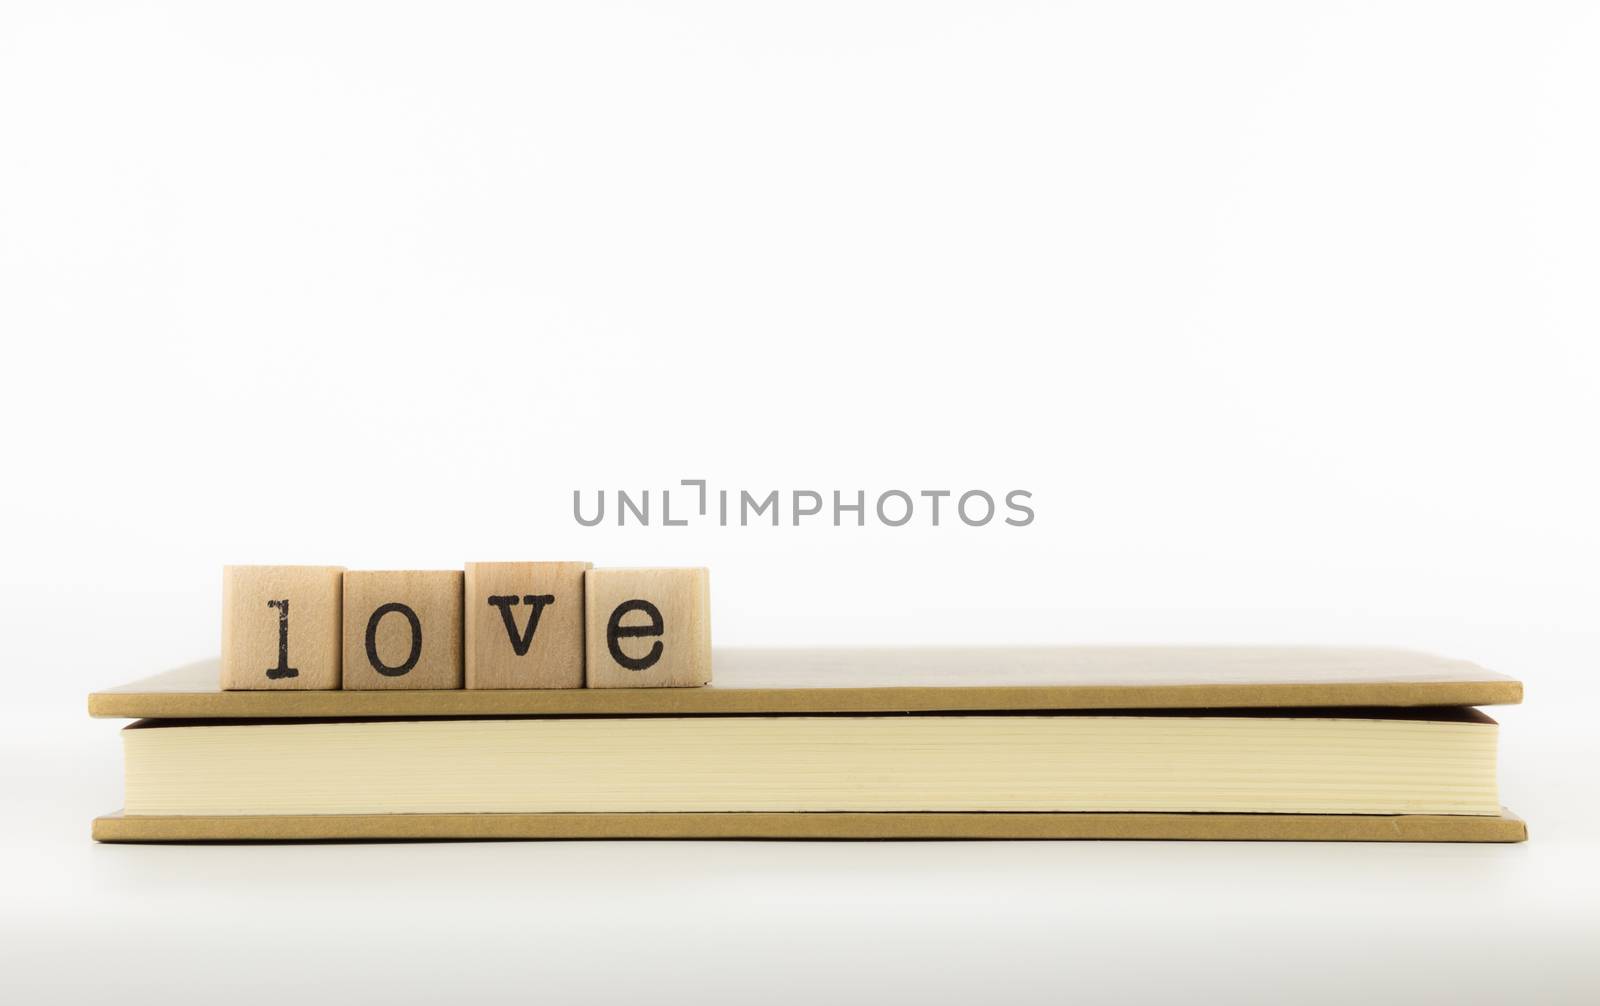 closeup love wording stack on a book, emotion concept and idea